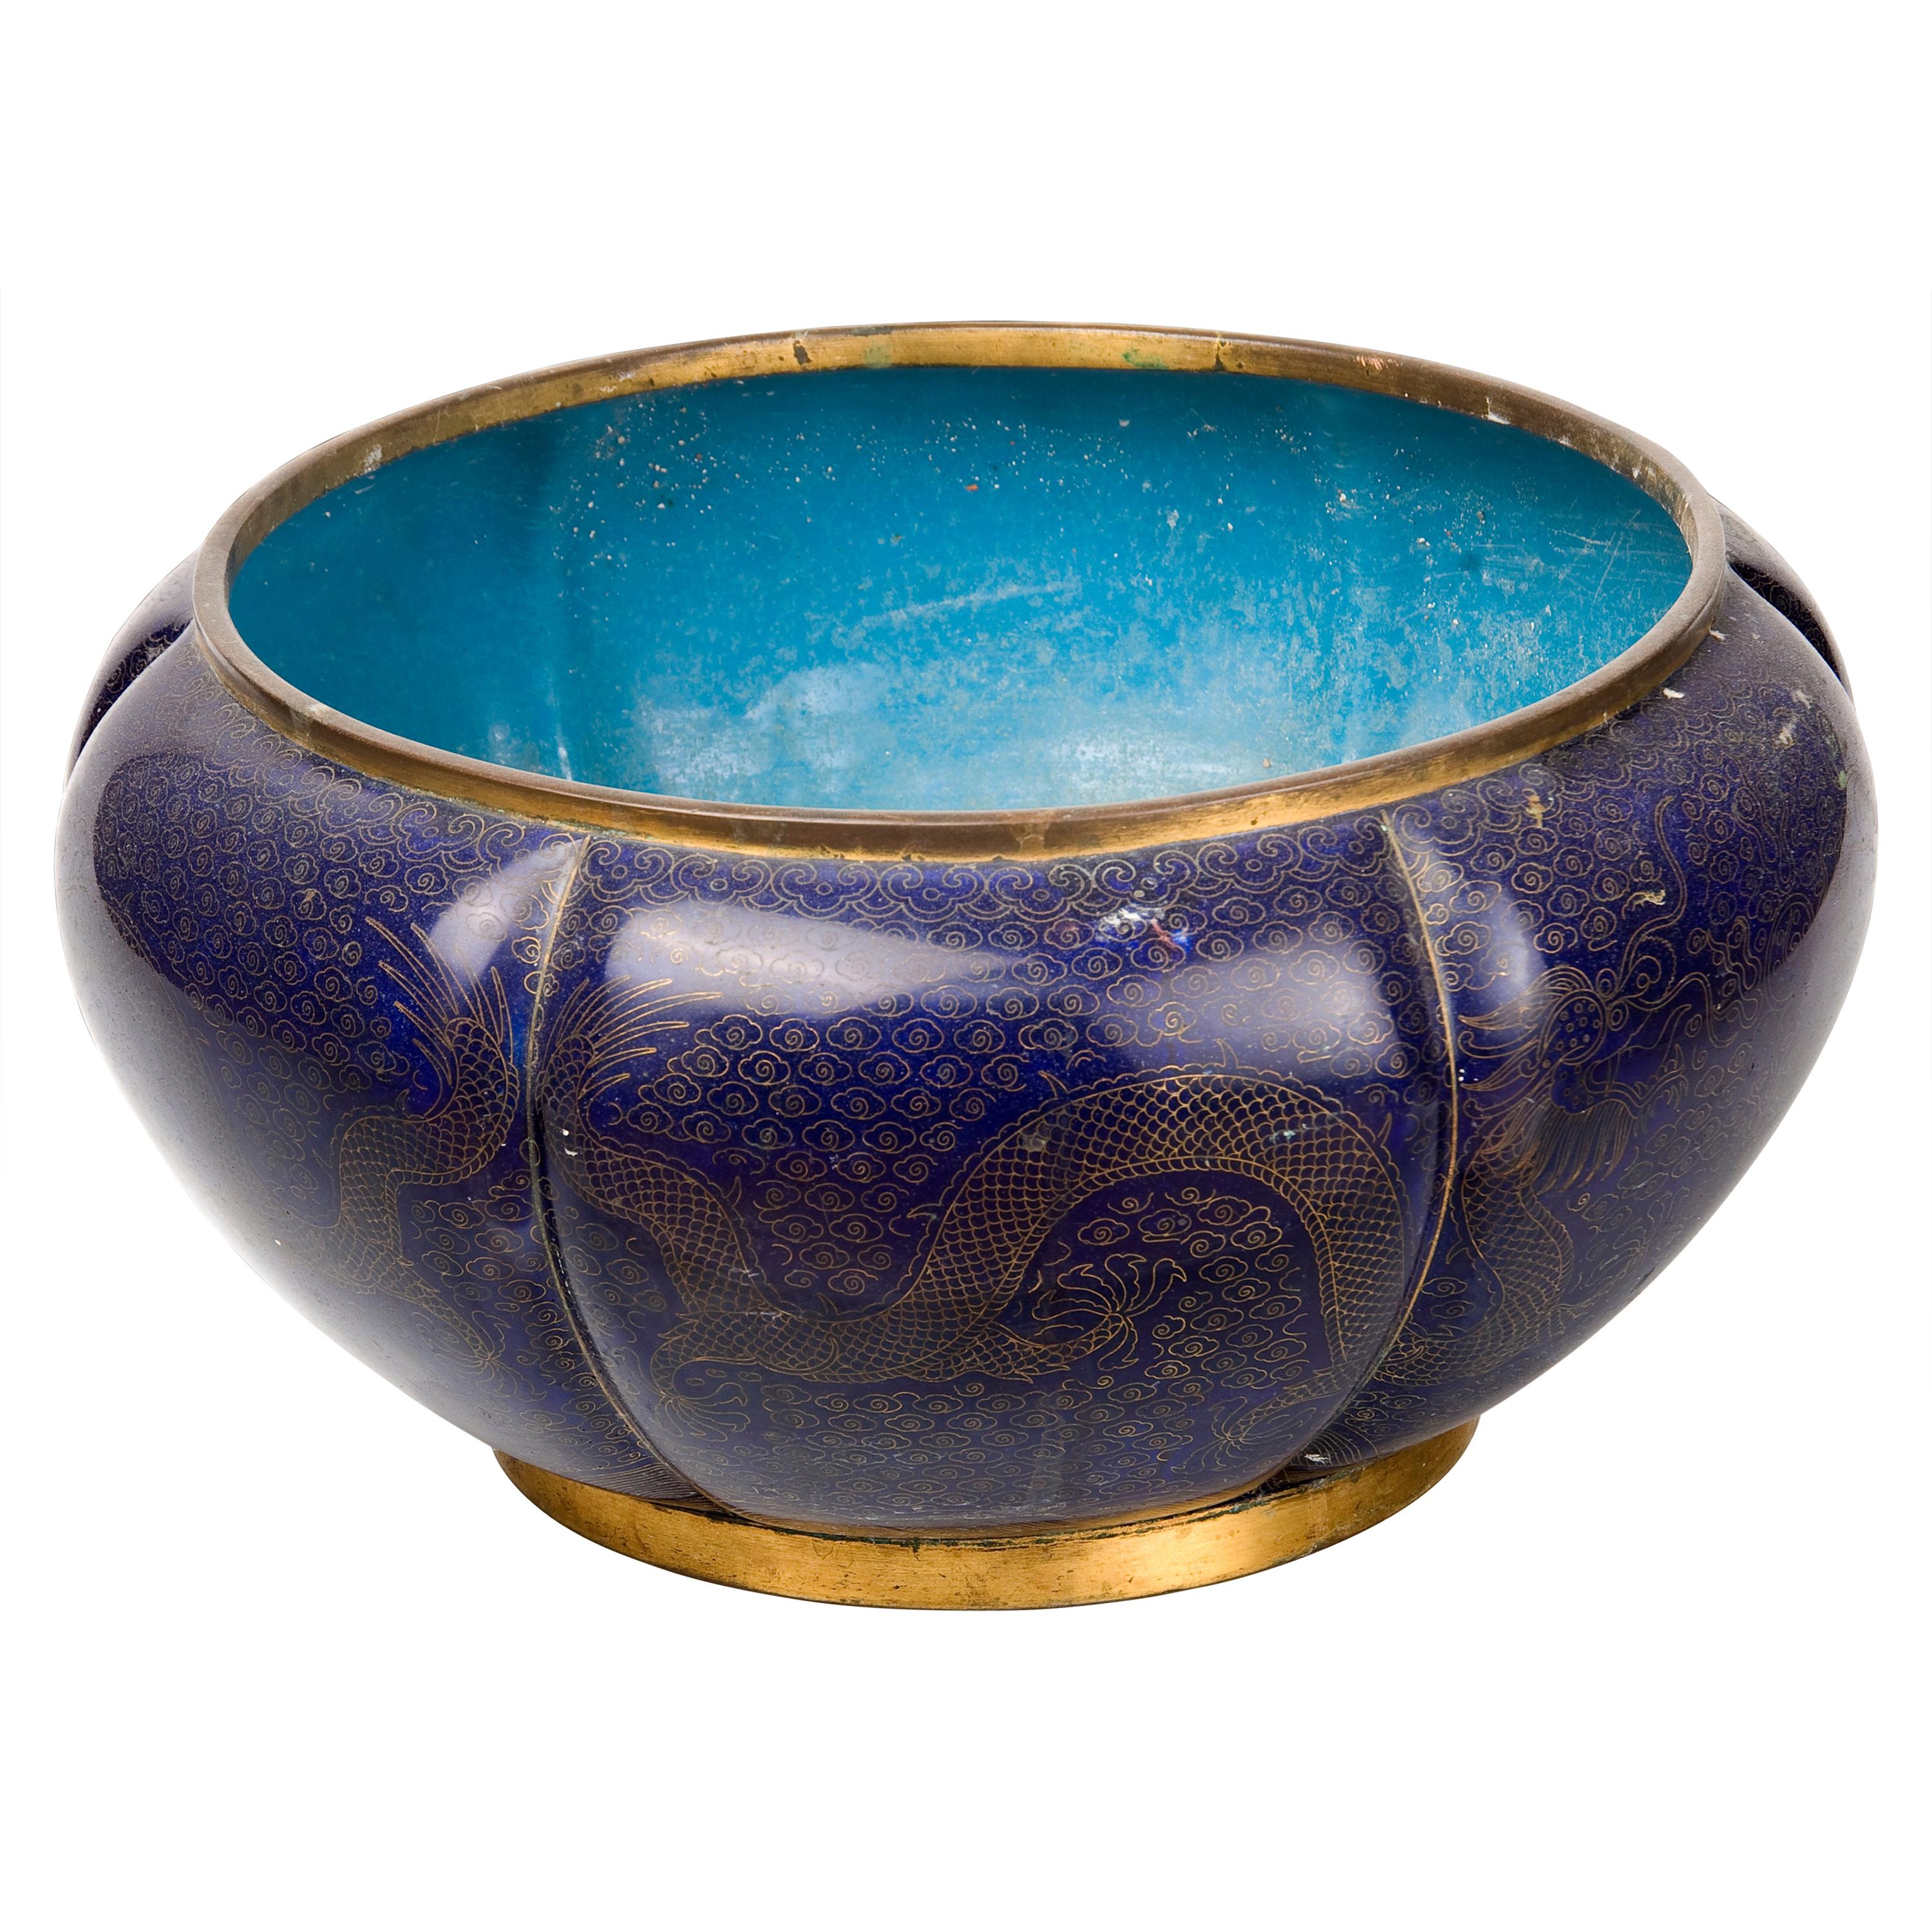 Cloisonne Bowl, Early 20th Century